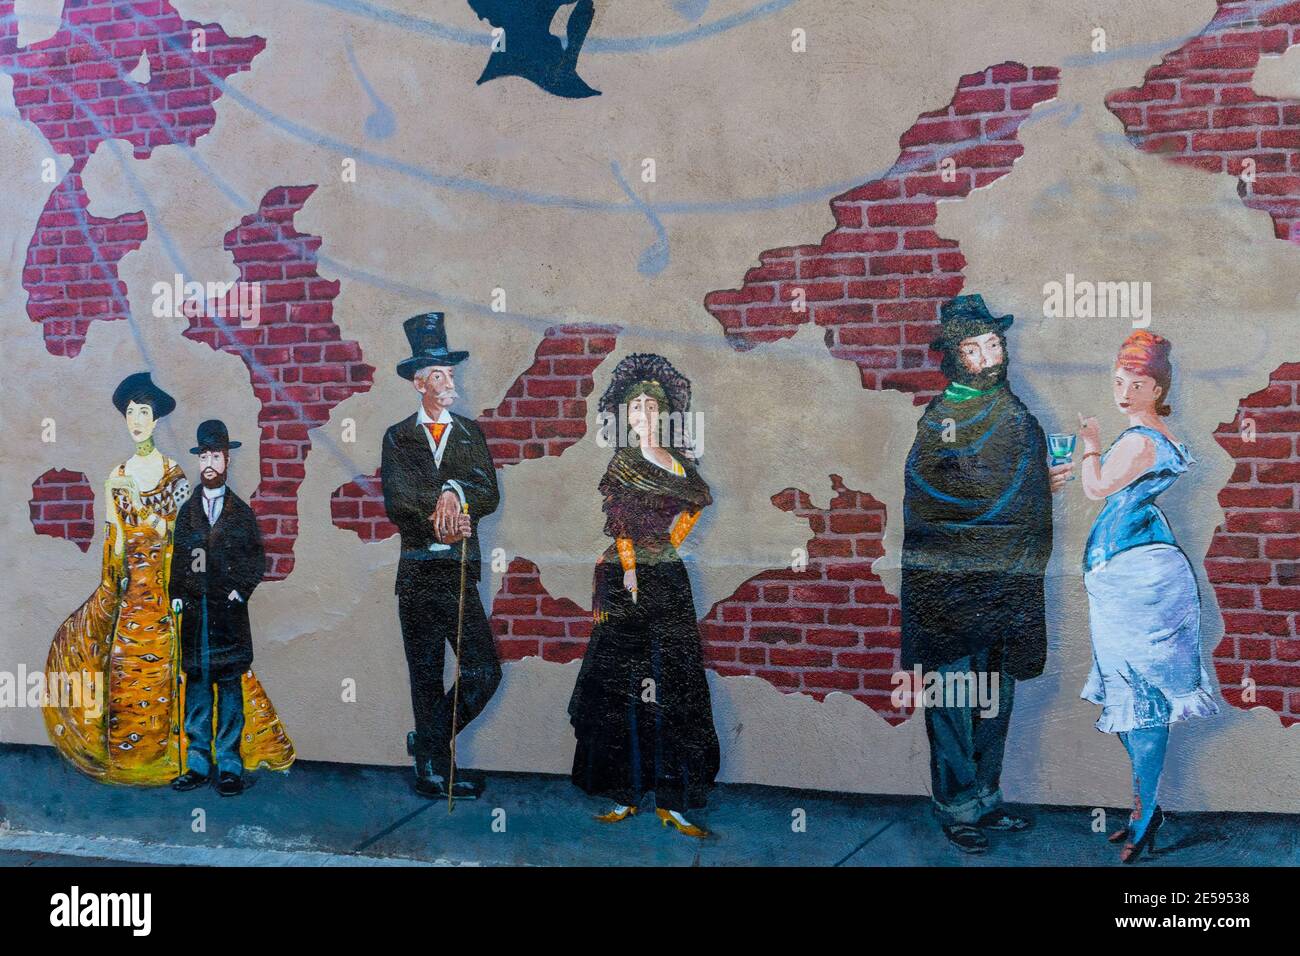 The Piano Room Mural, Leroux Street Parking Lot in Old Town Flagstaff, Arizona, USA Stock Photo